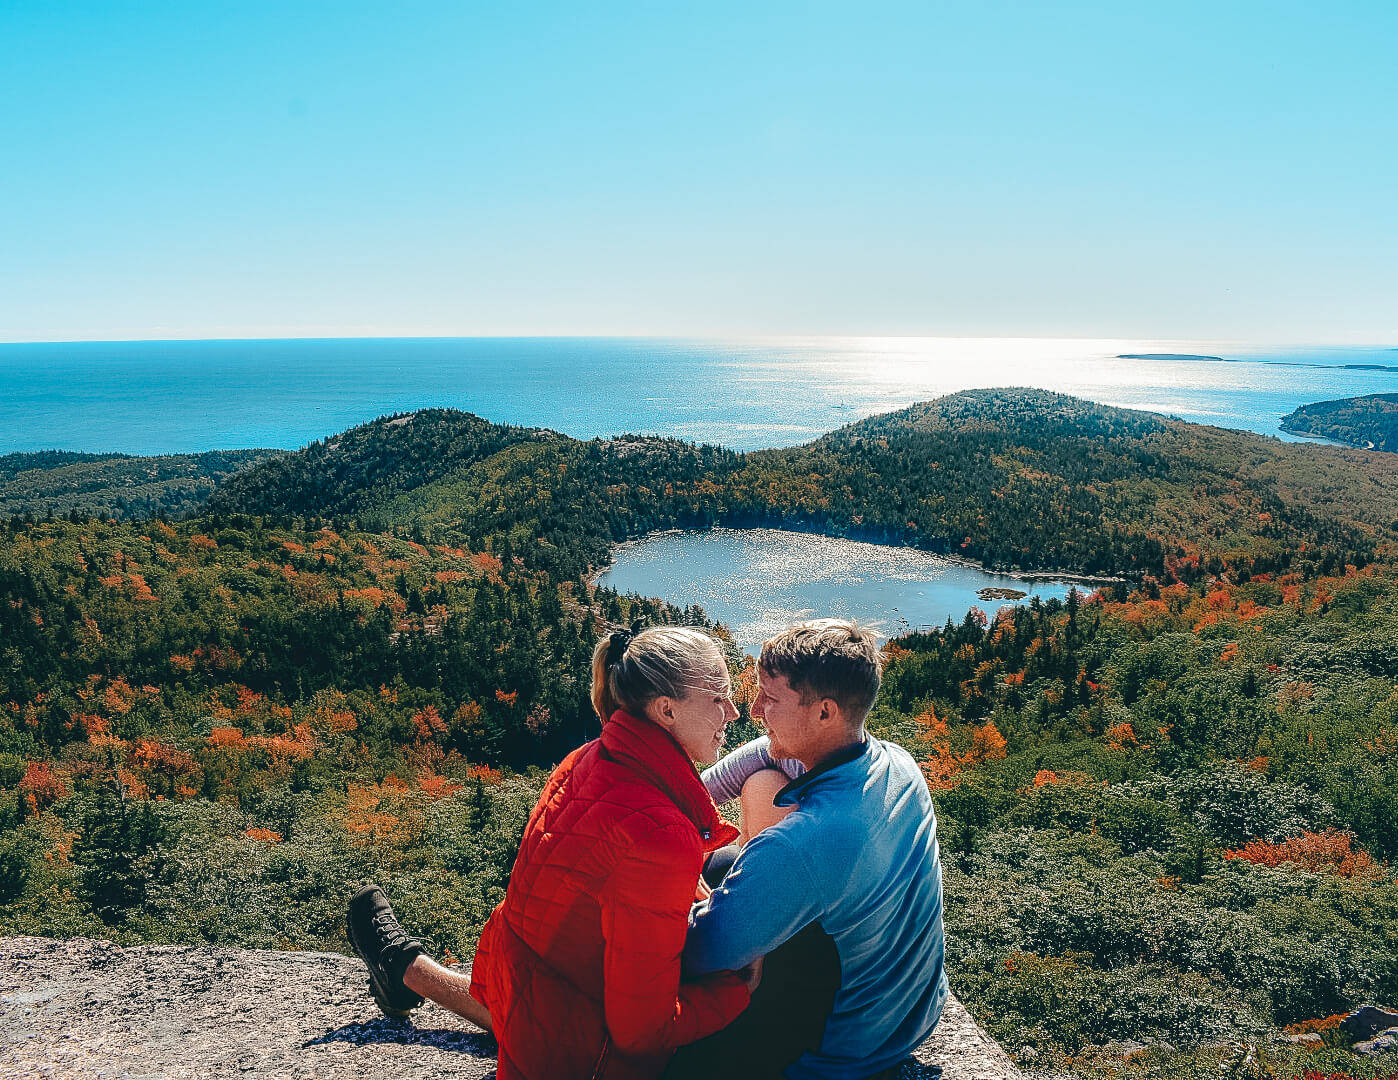 The Complete Guide to Acadia National Park